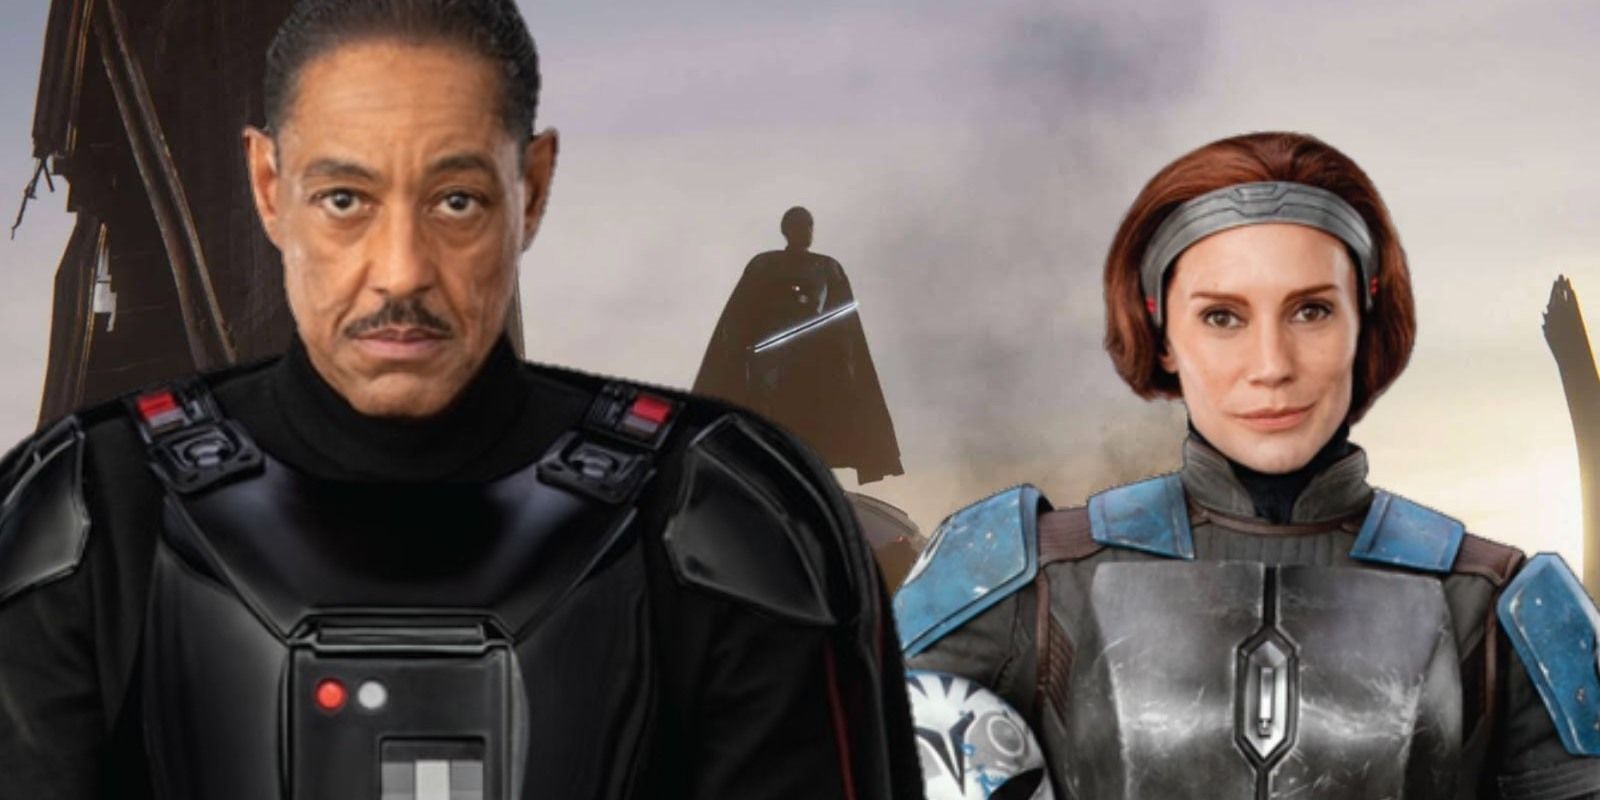 The Mandalorian Moff Gideon and Bo Katan Stand in Front of Ship